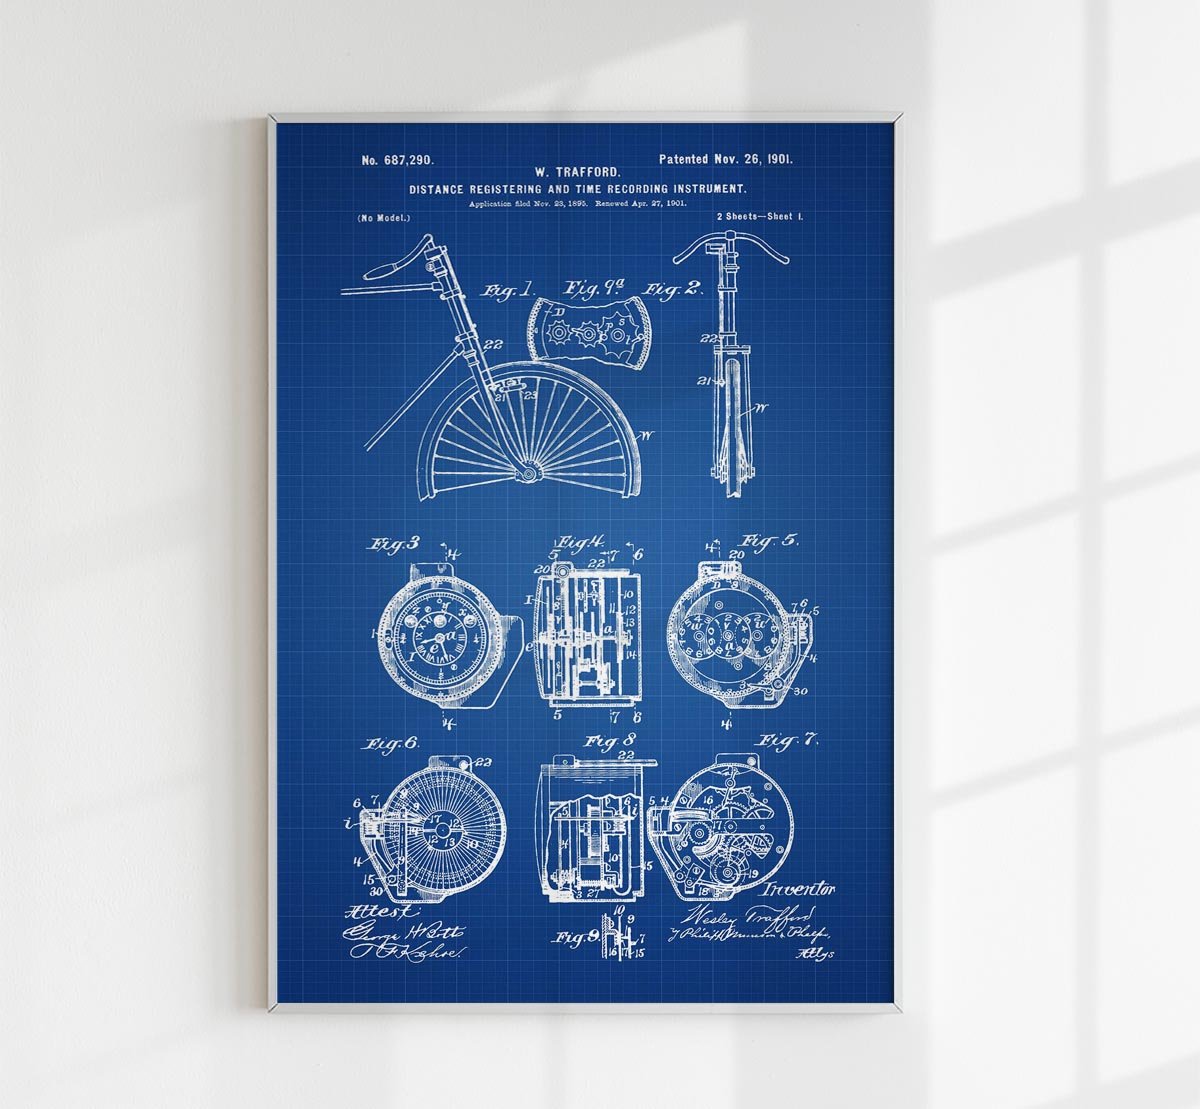 Distance & Time Recording Instrument Patent Poster